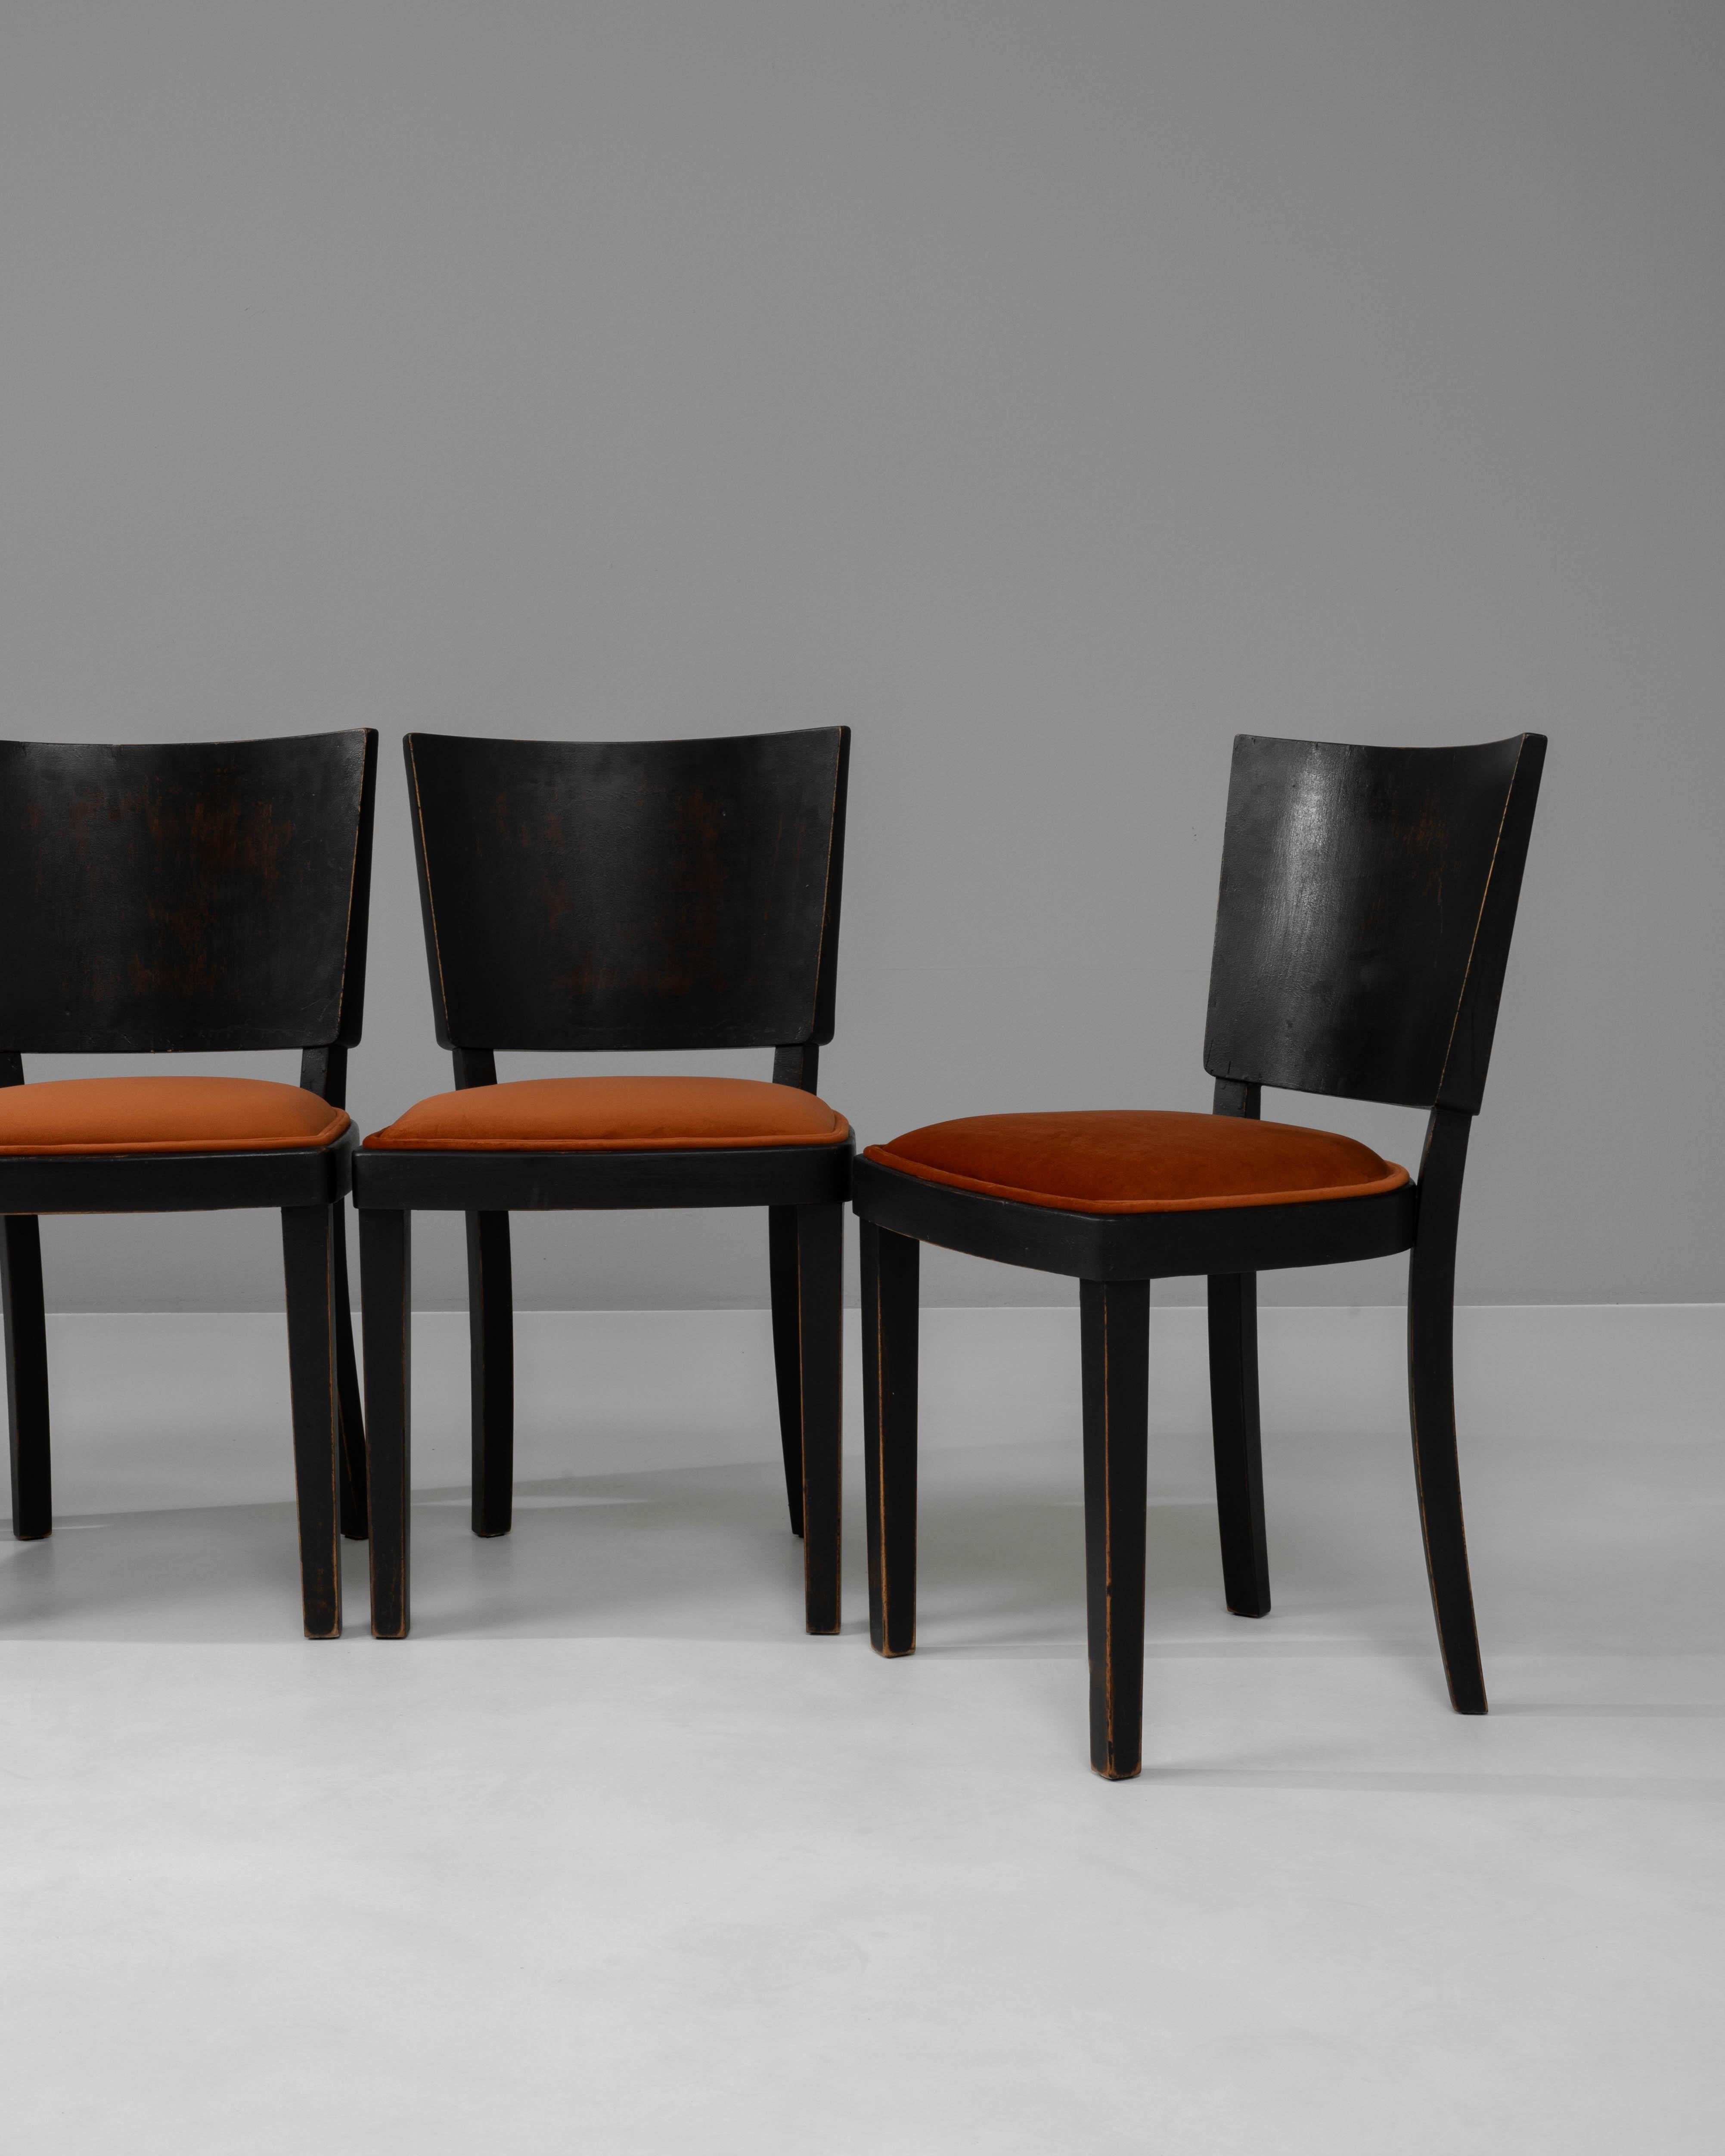 20th Century 1950s Czech Wooden Dining Chairs With Upholstered Seats, Set of 4